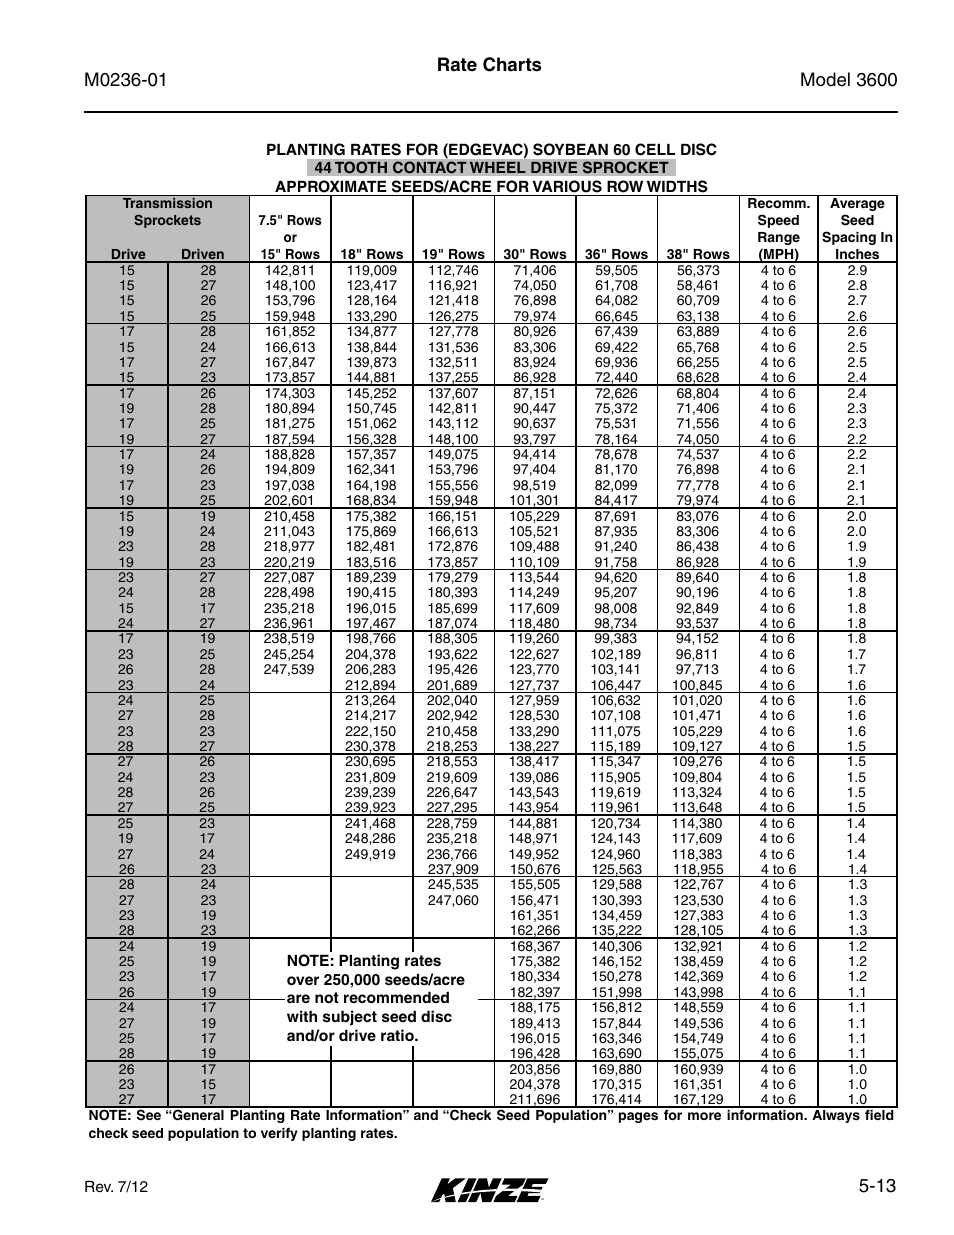 13 rate charts | Kinze 3600 Lift and Rotate Planter Rev. 7/14 User Manual | Page 91 / 172